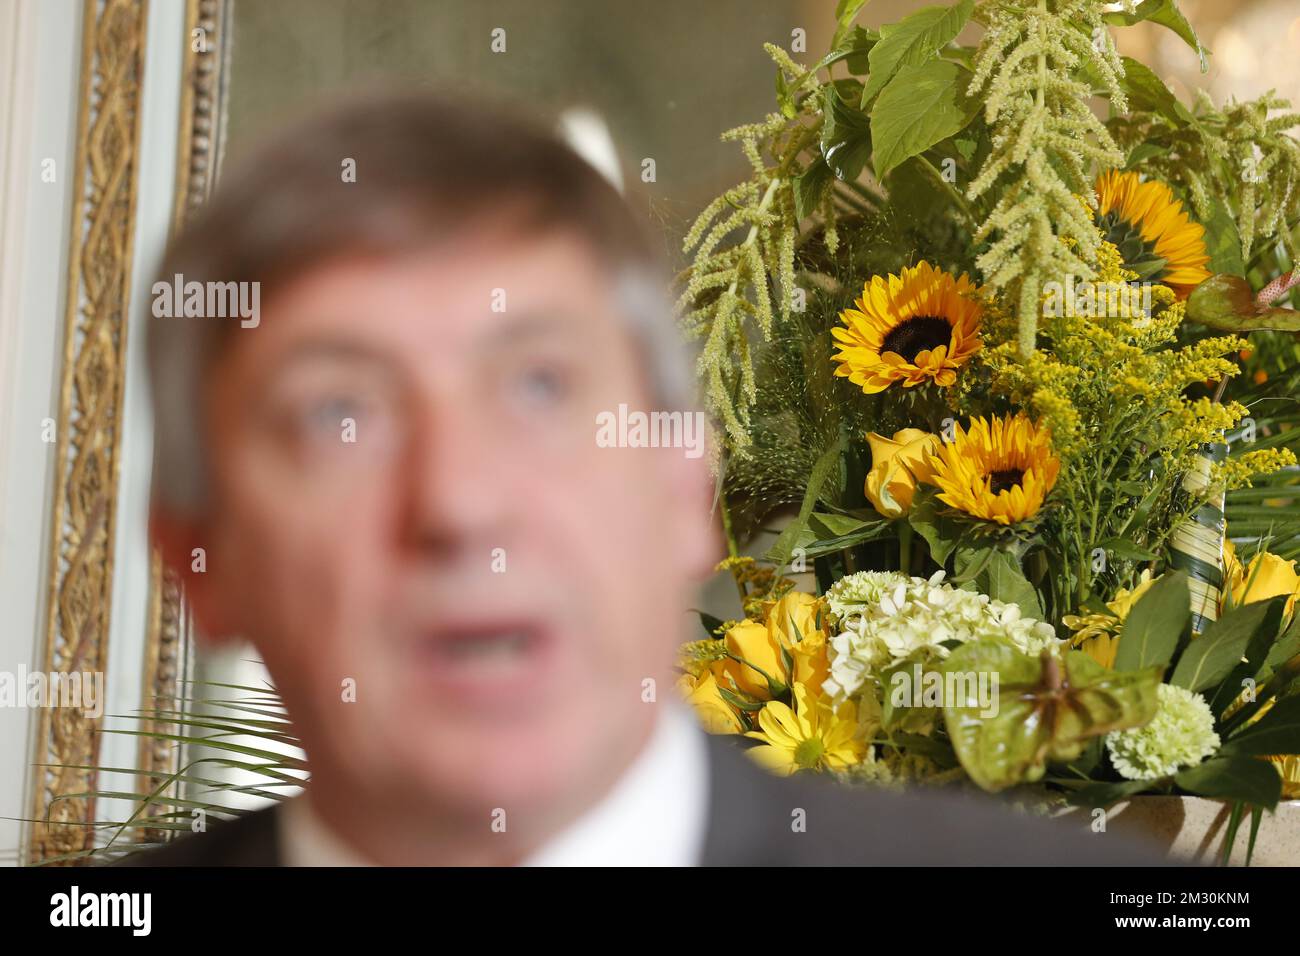 Sunflowers pictured behind N-VA's Jan Jambon during a press conference regarding the formation of a new Flemish regional government, Monday 30 September 2019, in Brussels. BELGA PHOTO NICOLAS MAETERLINCK  Stock Photo